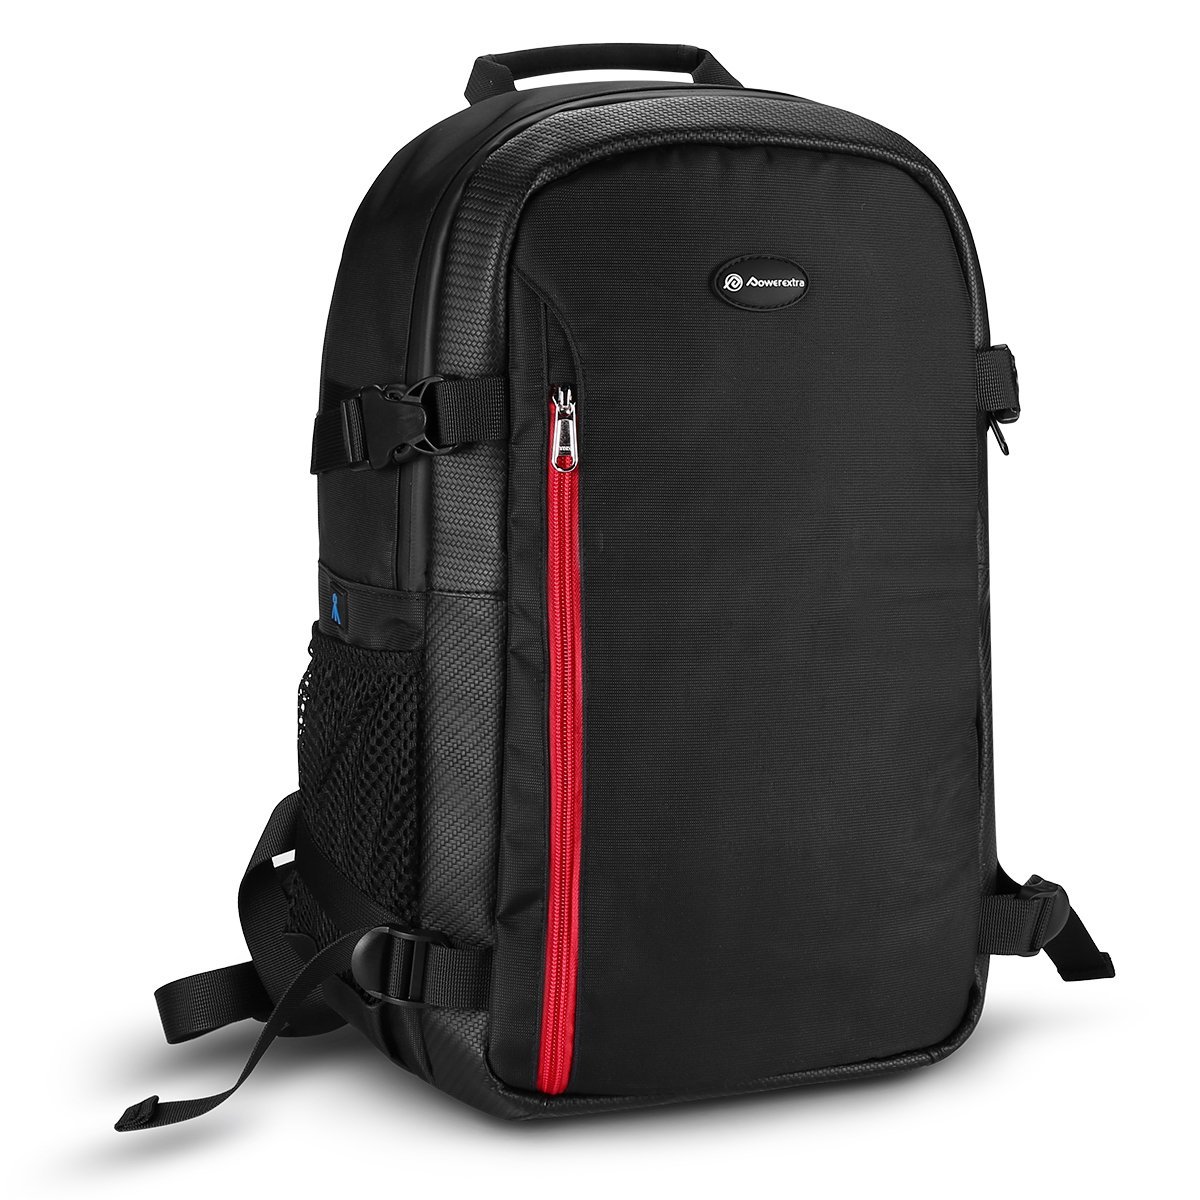 dslr backpack with laptop compartment